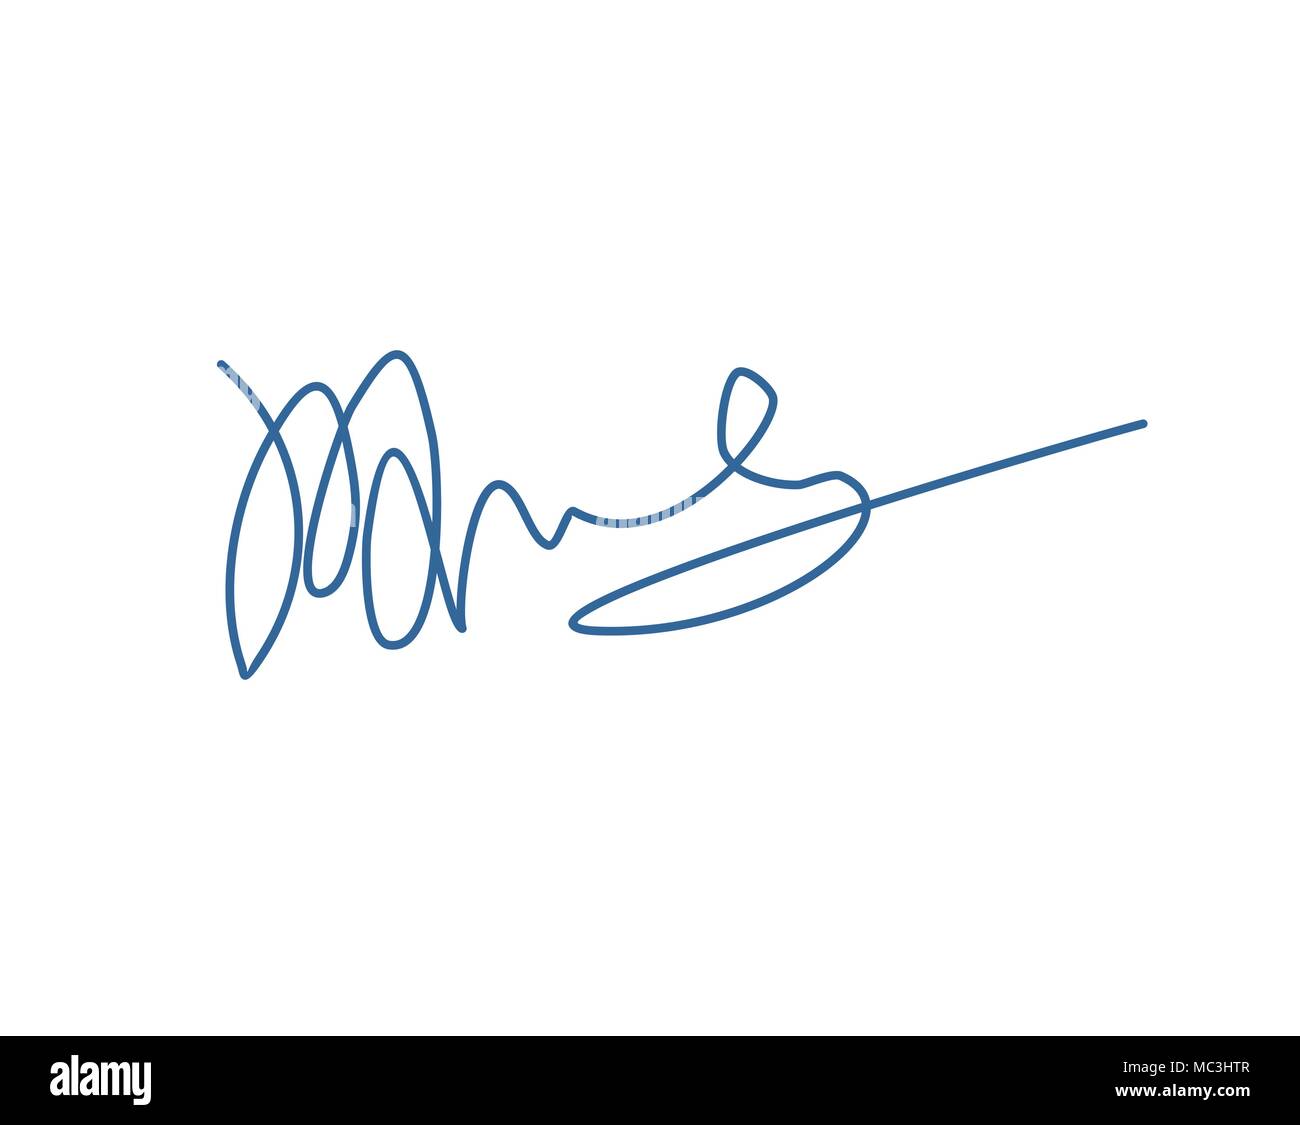 Create a professional White background signature for your documents or emails